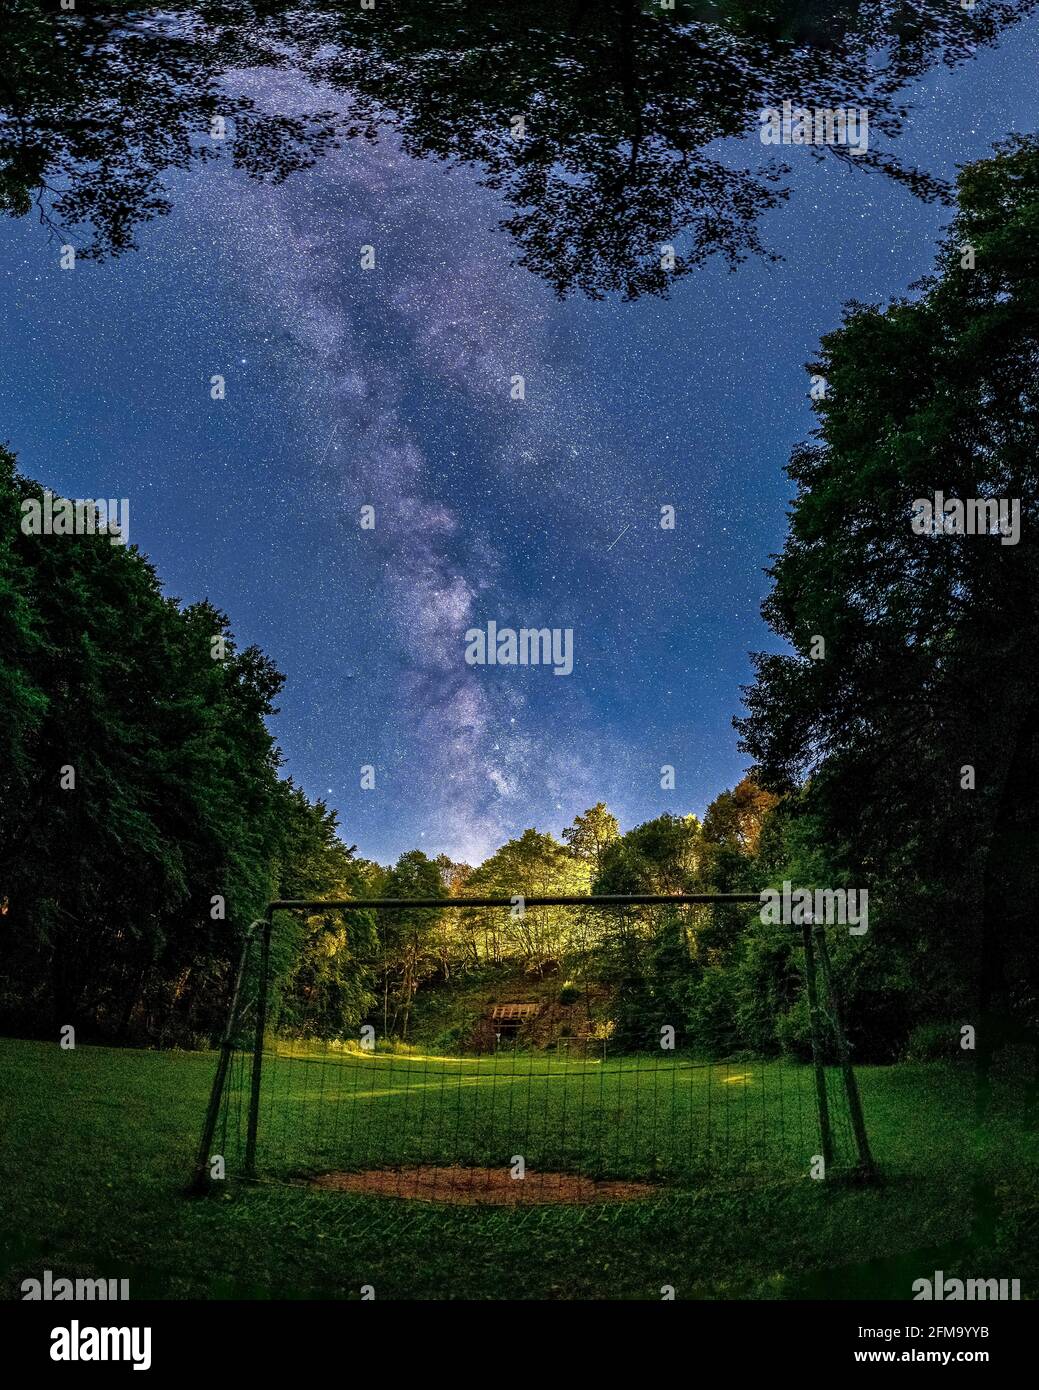 Soccer goal on the field with milky way in the background. Stock Photo